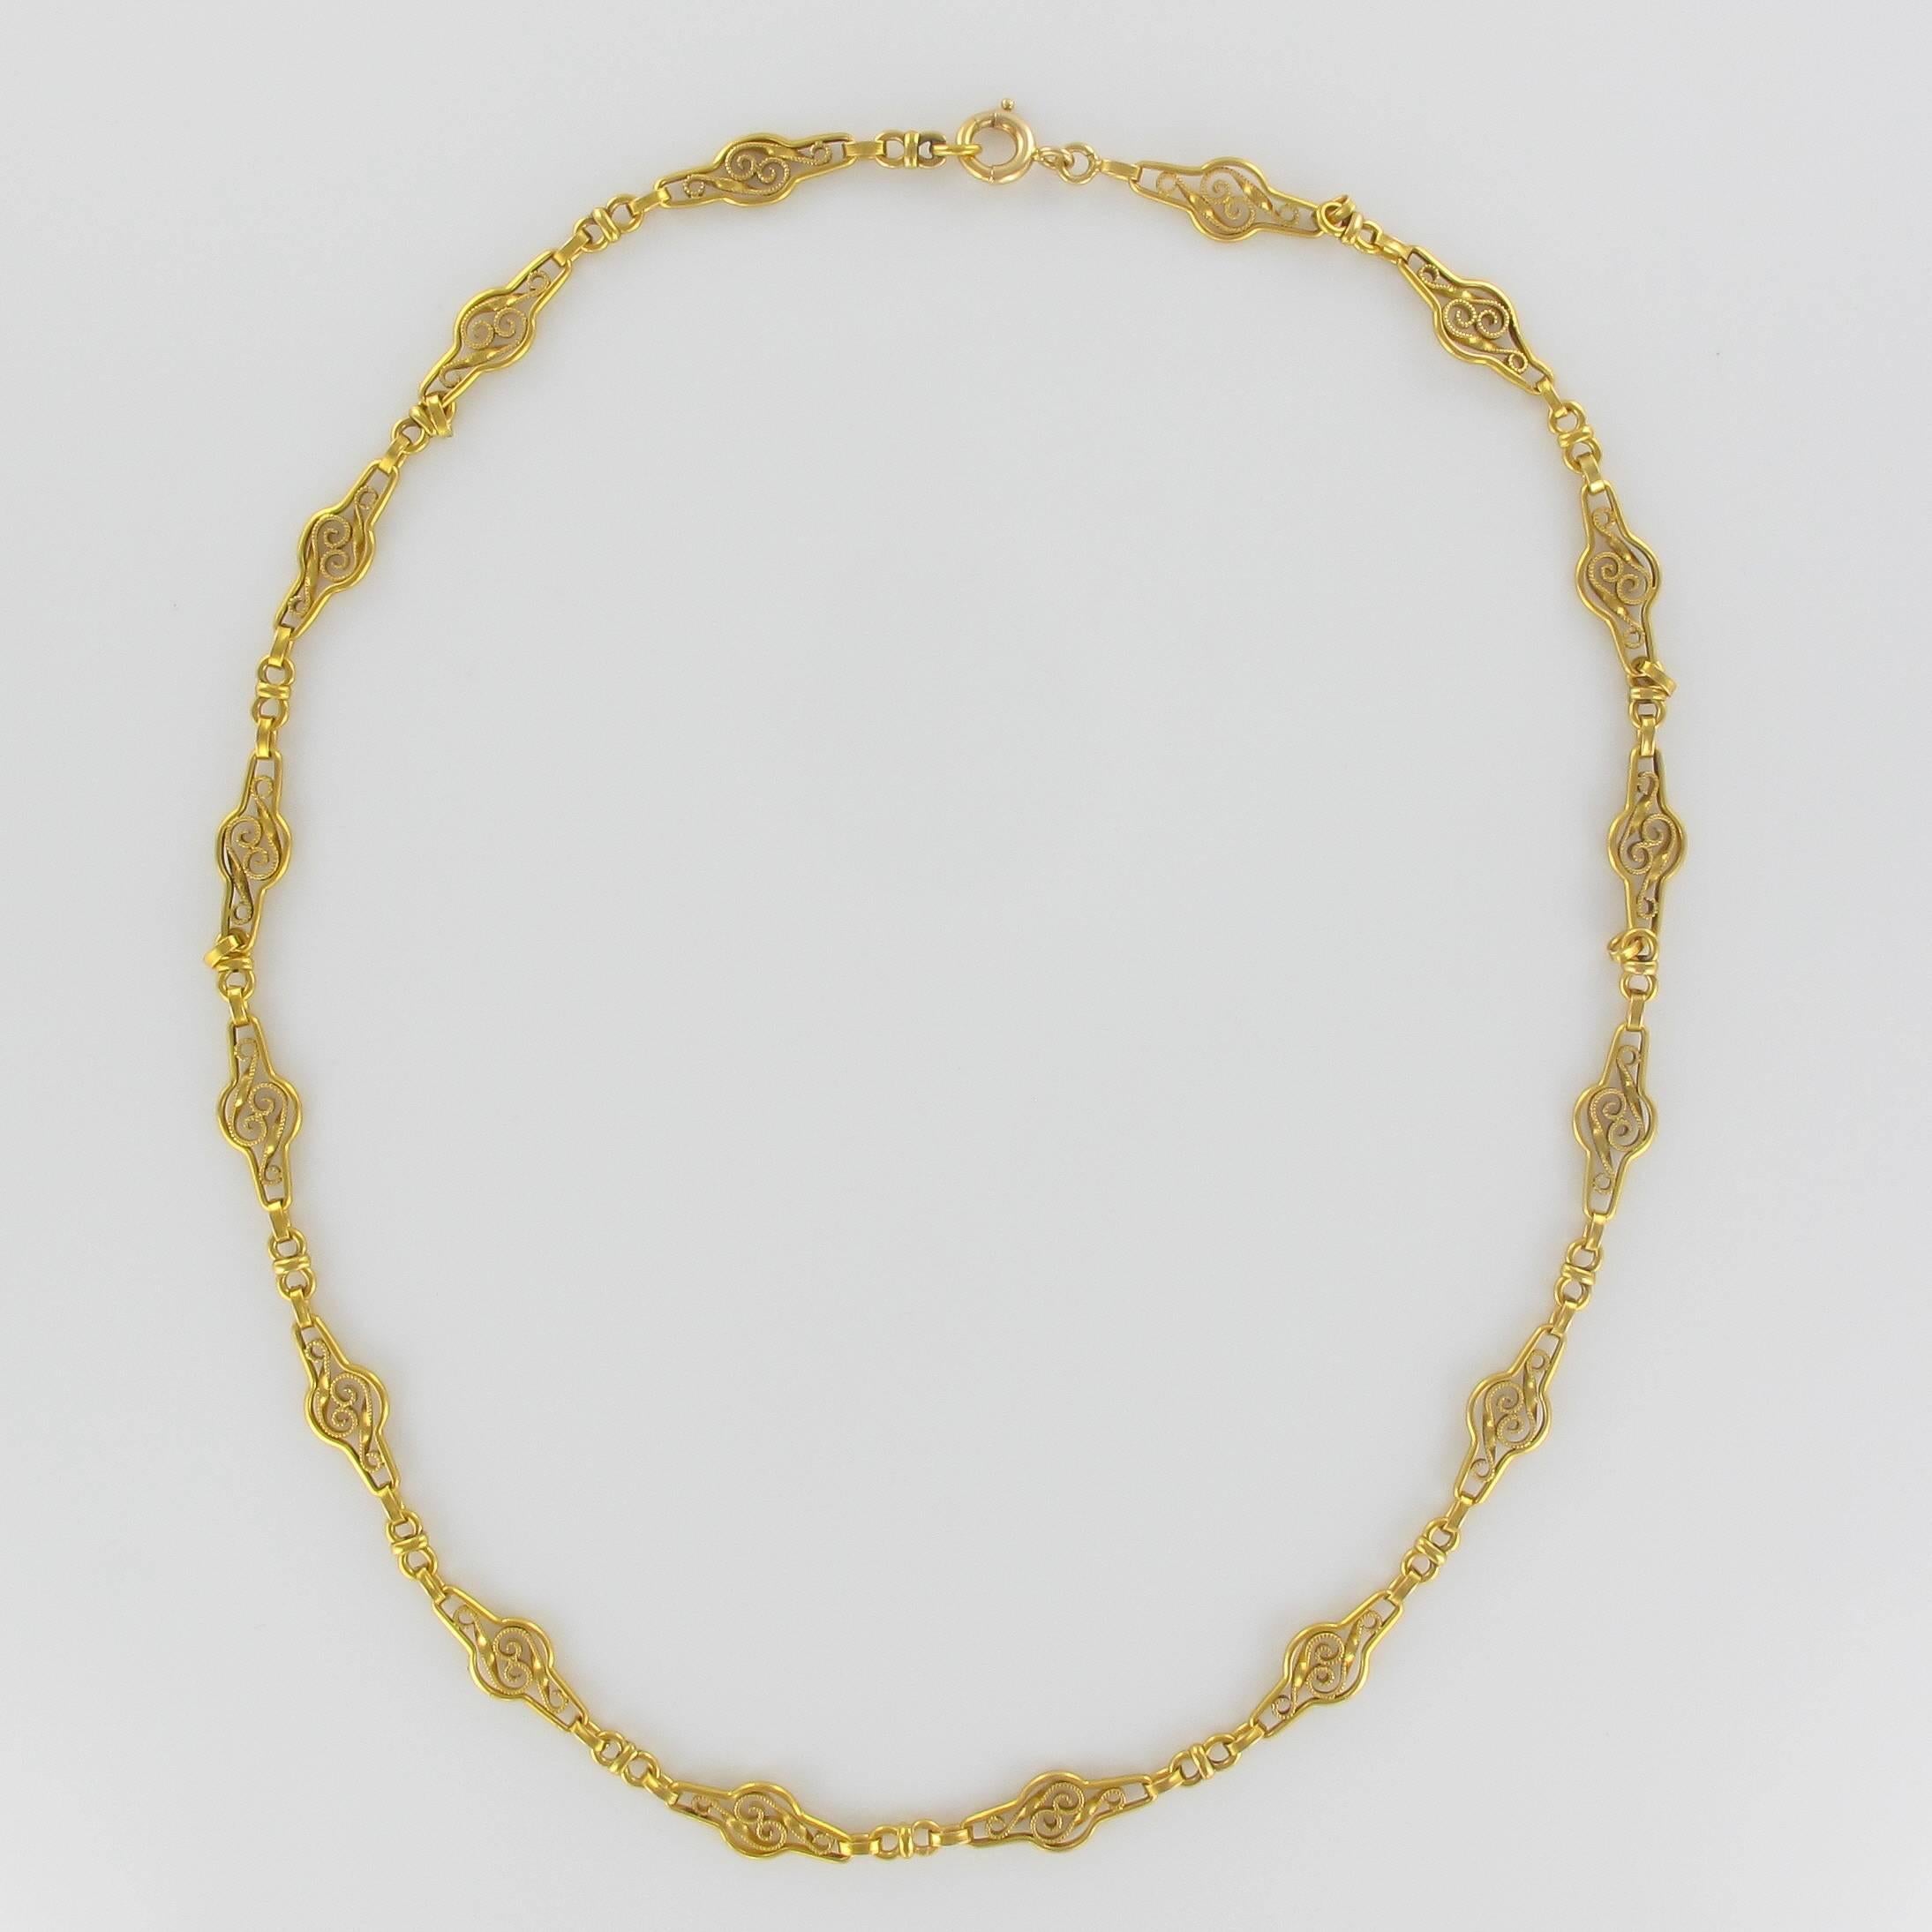 Women's 1900s Gold Necklace with Filigree Motifs